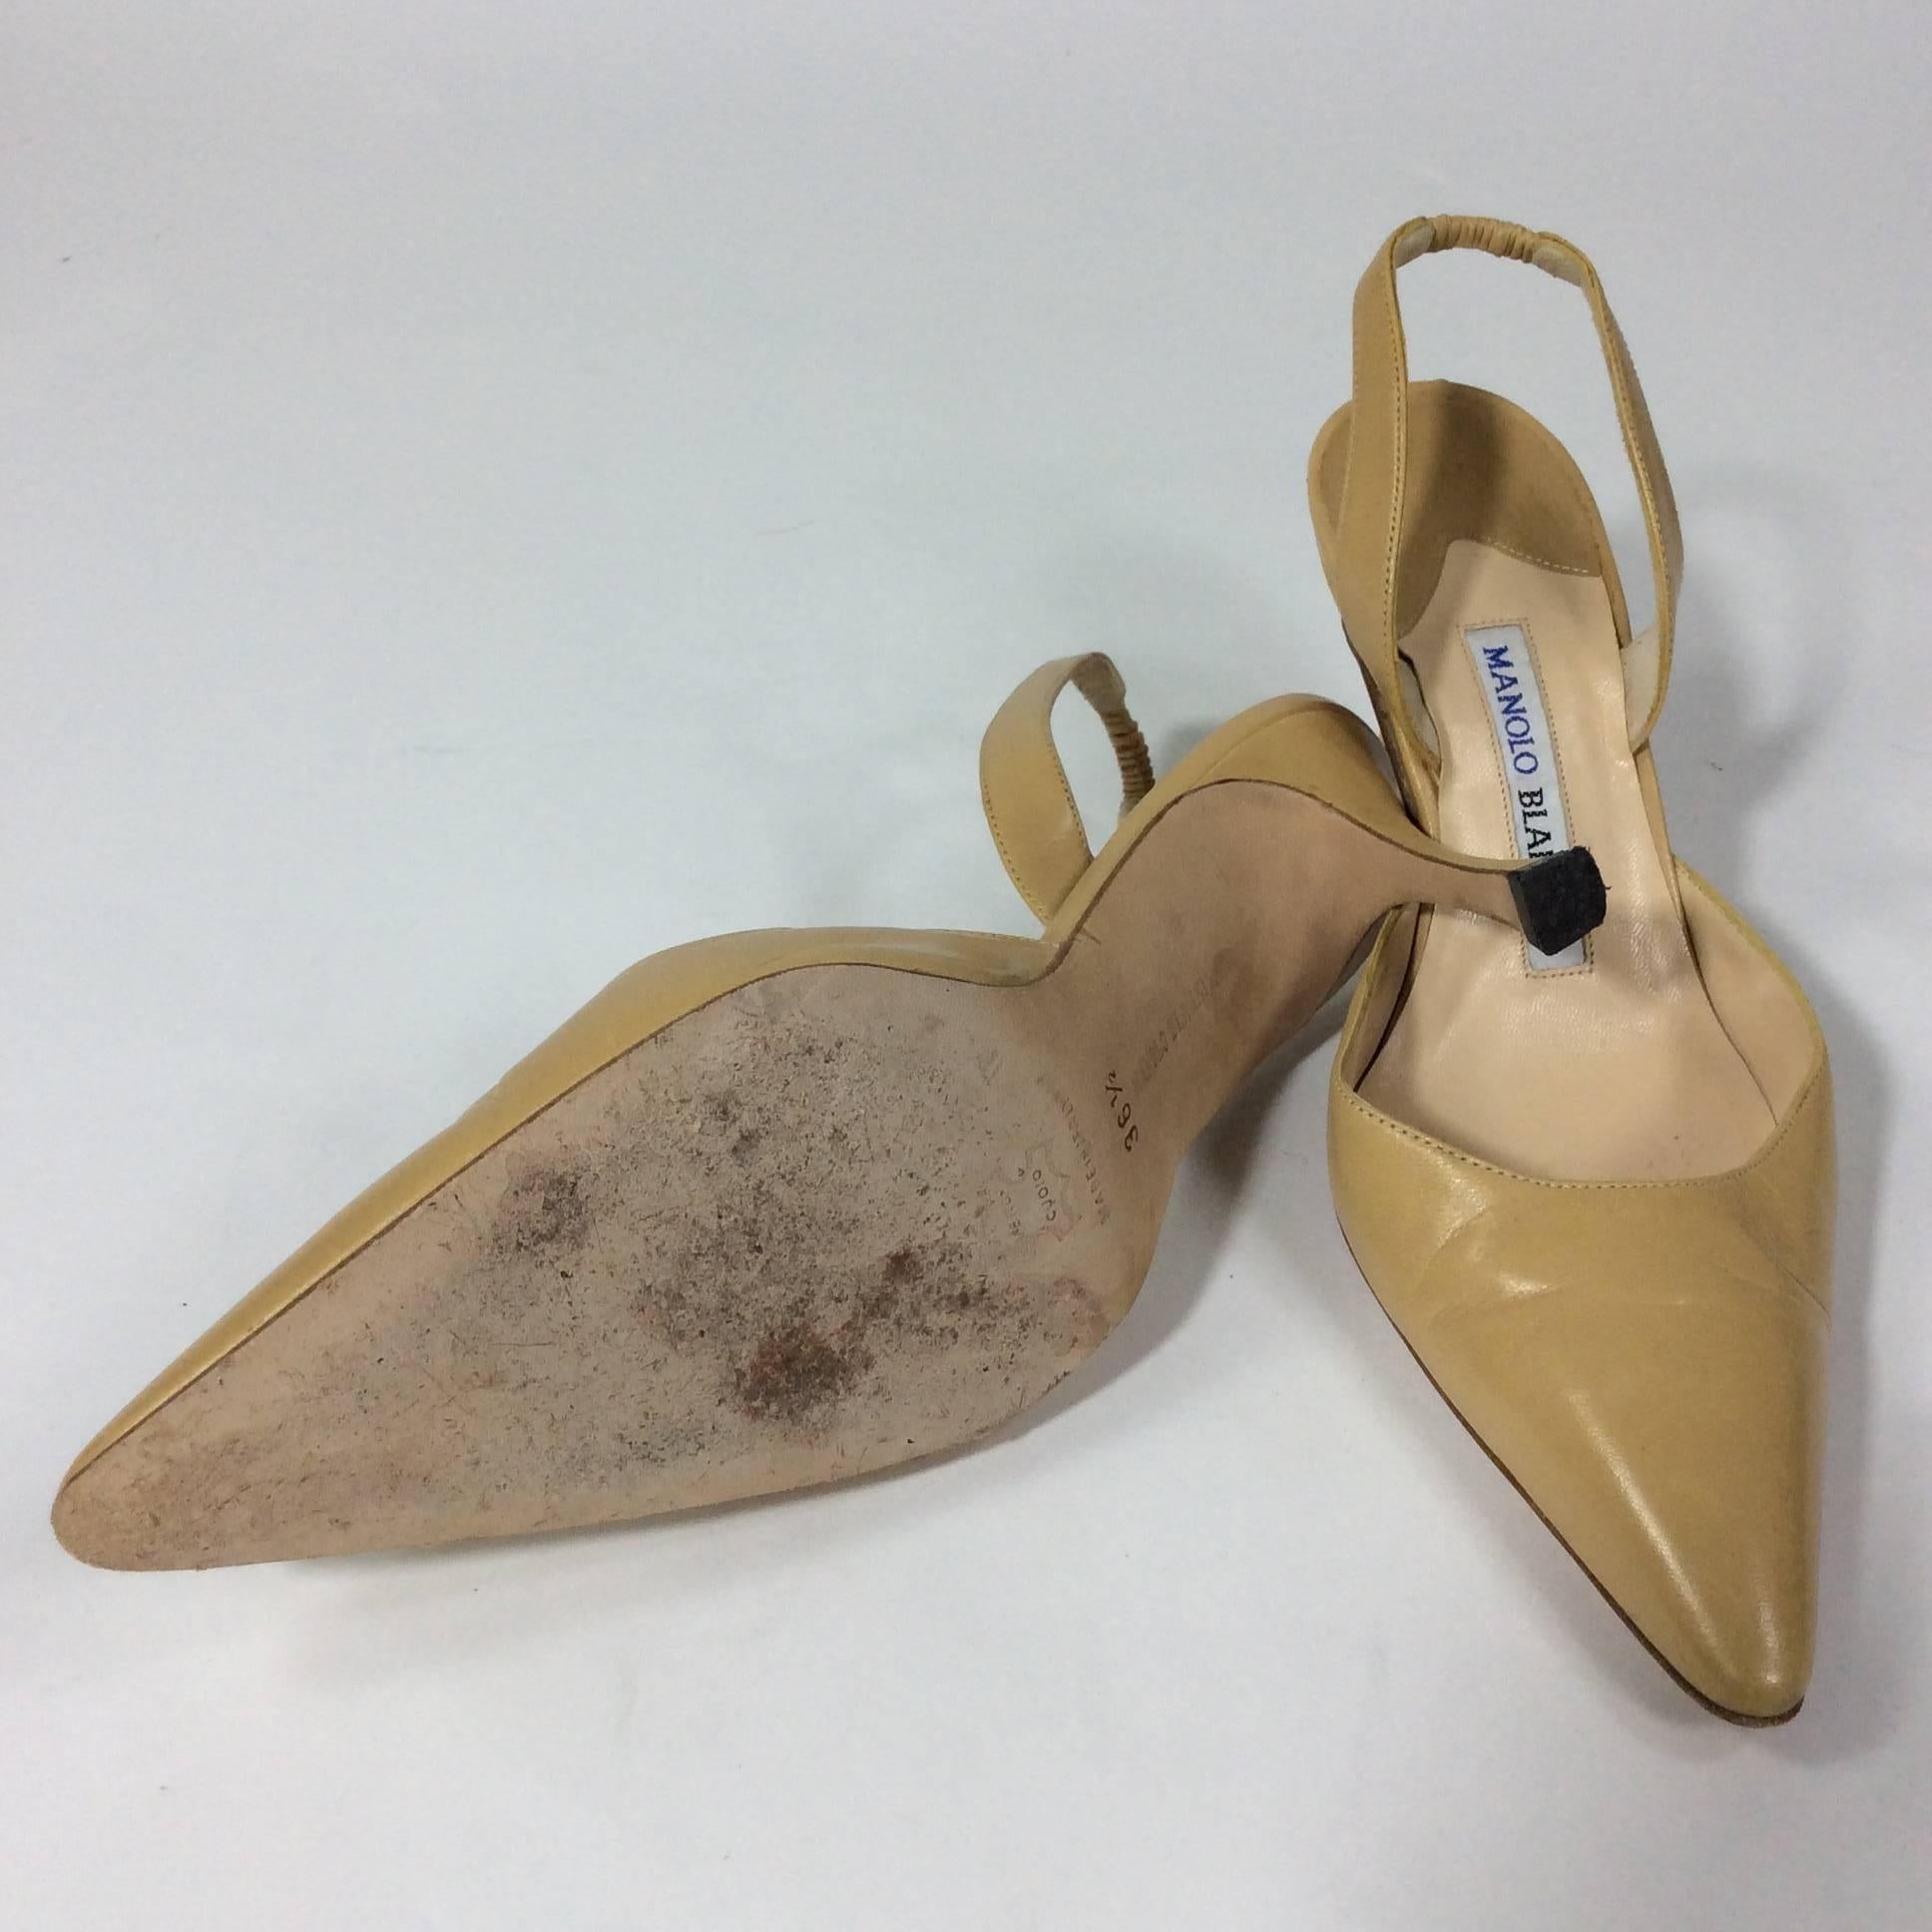 Manolo Blahnik Tan Pointed Heels with Heel Strap In Good Condition For Sale In Narberth, PA